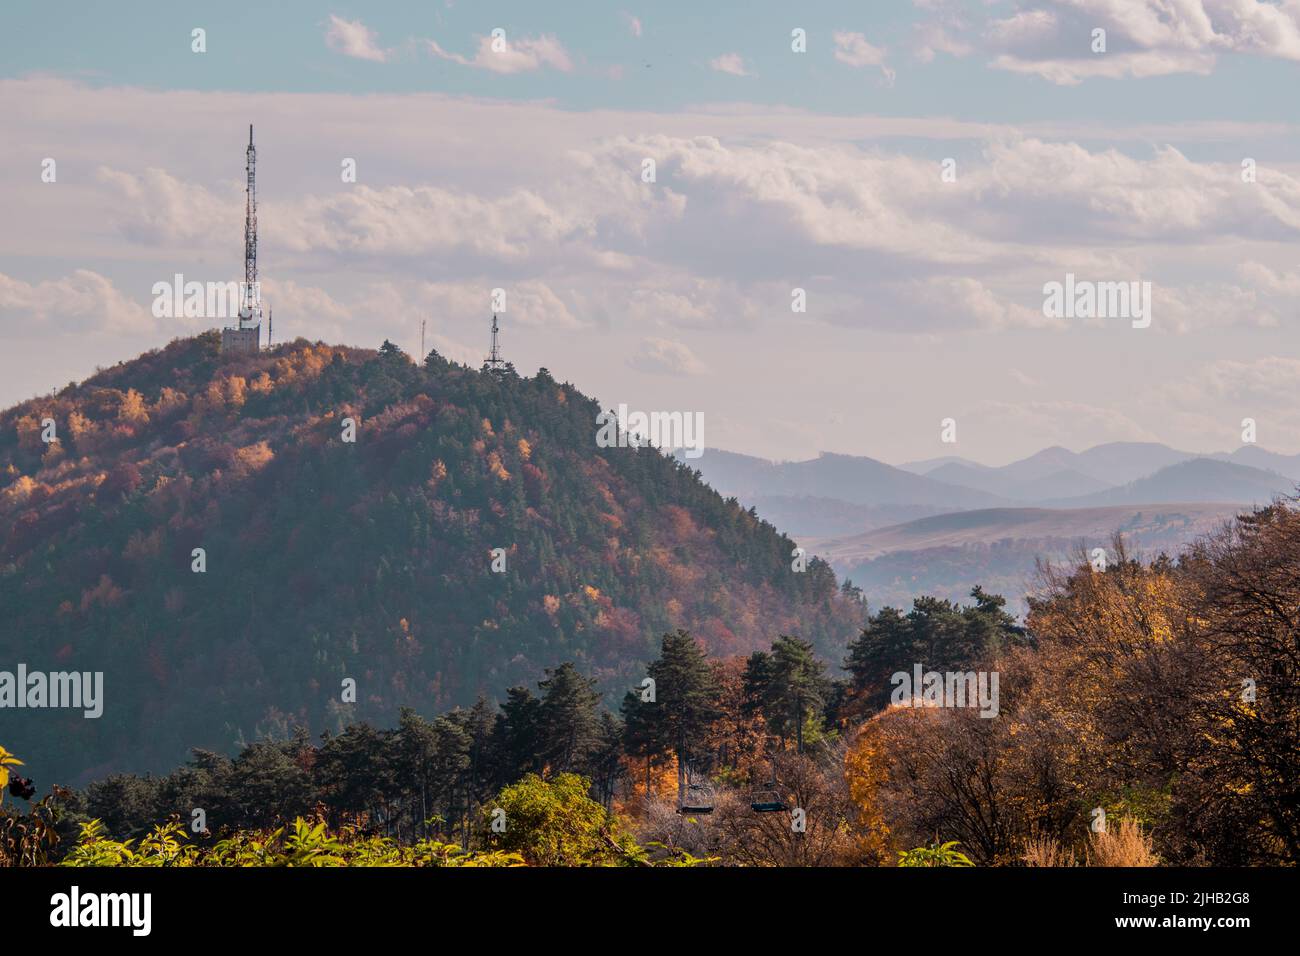 A tower antenna on the top of the hill in Piatra Neamt, Romania Stock Photo